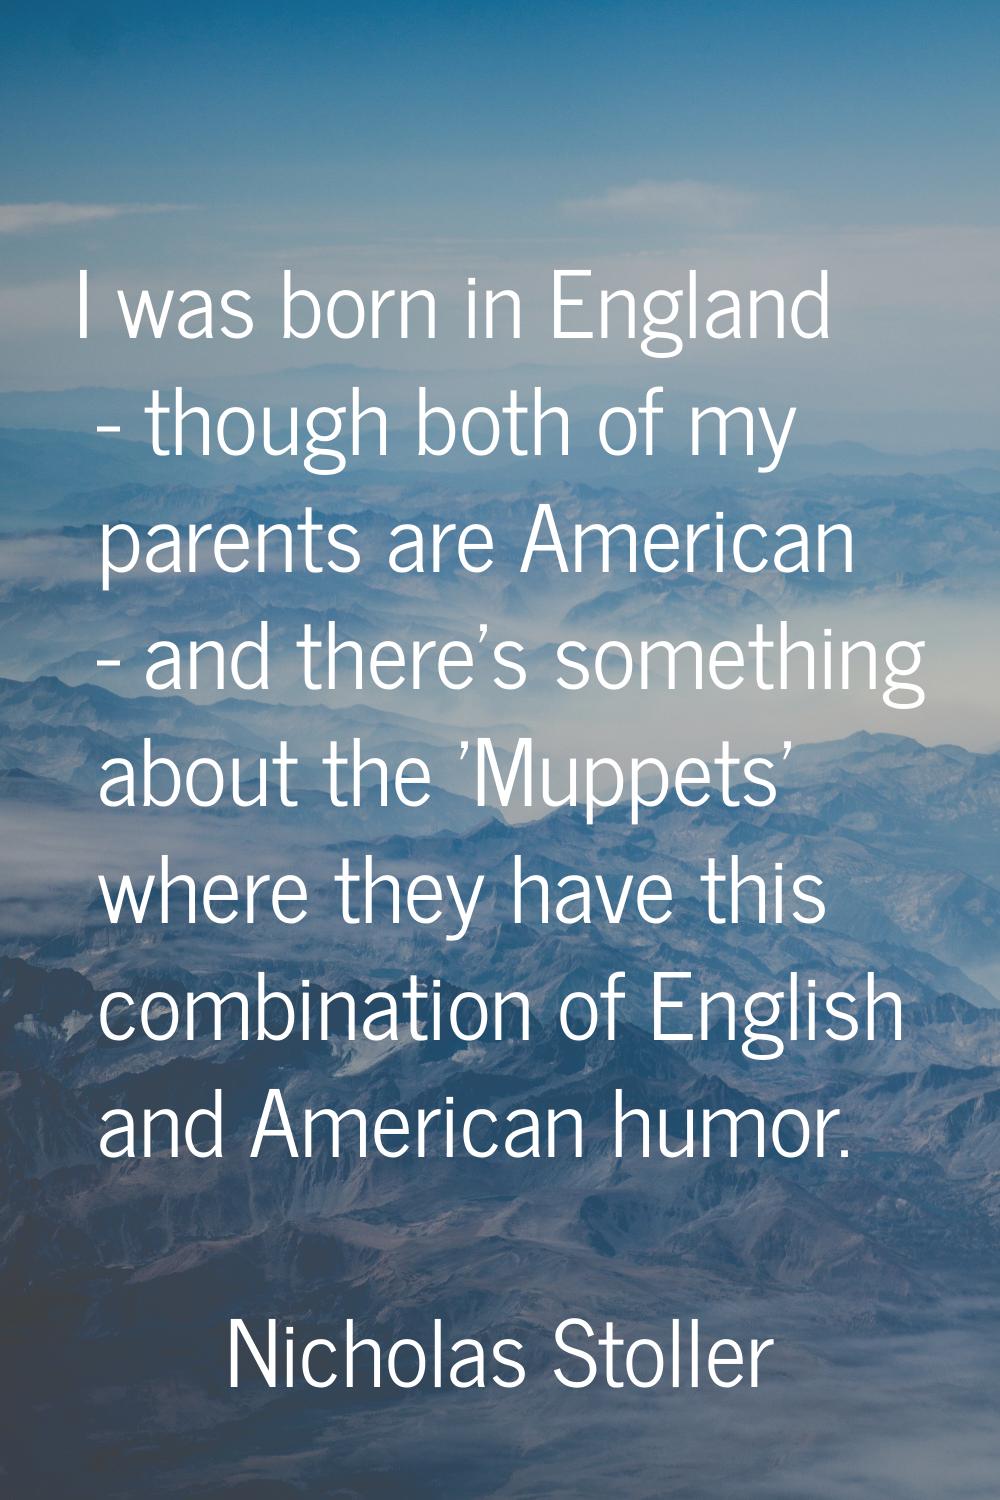 I was born in England - though both of my parents are American - and there's something about the 'M